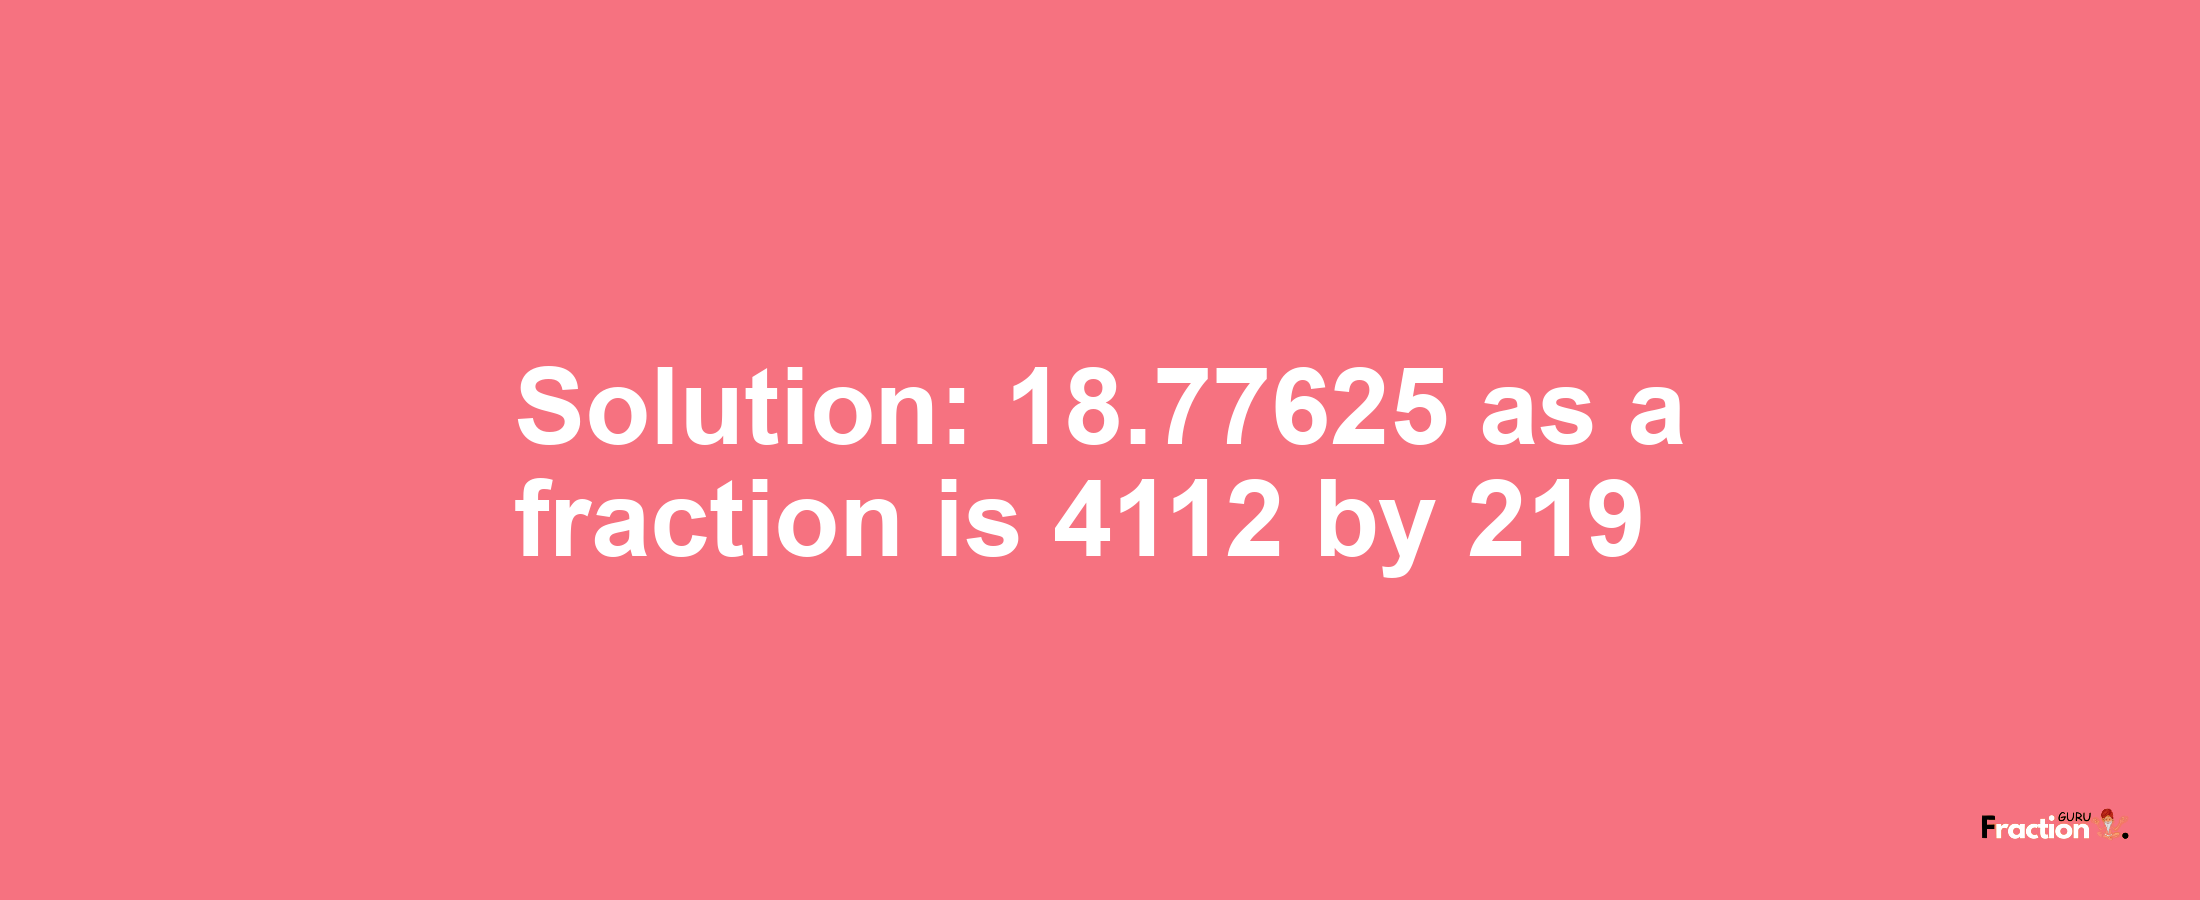 Solution:18.77625 as a fraction is 4112/219